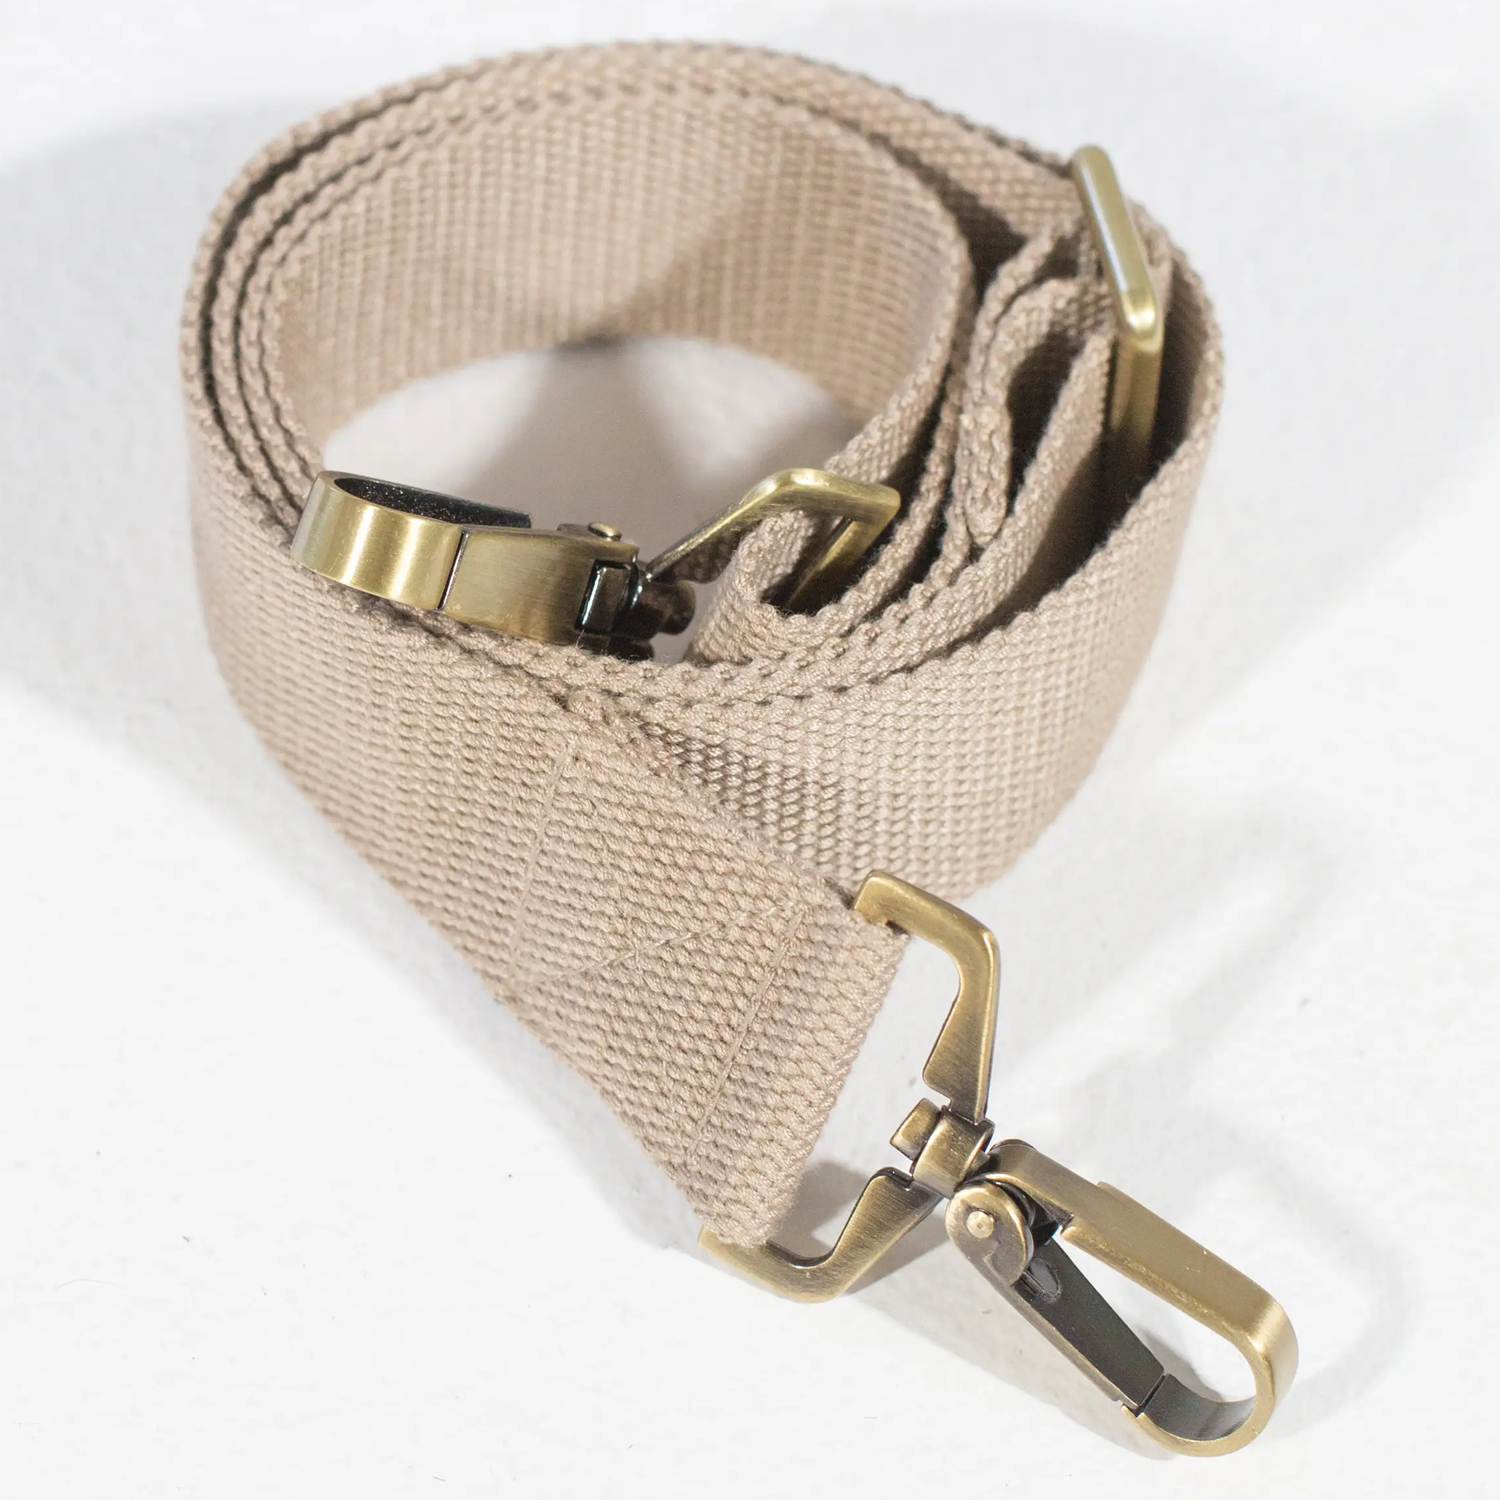 Pet Carrier - Champagne Mia Dog Carrier Strap by BK Atelier